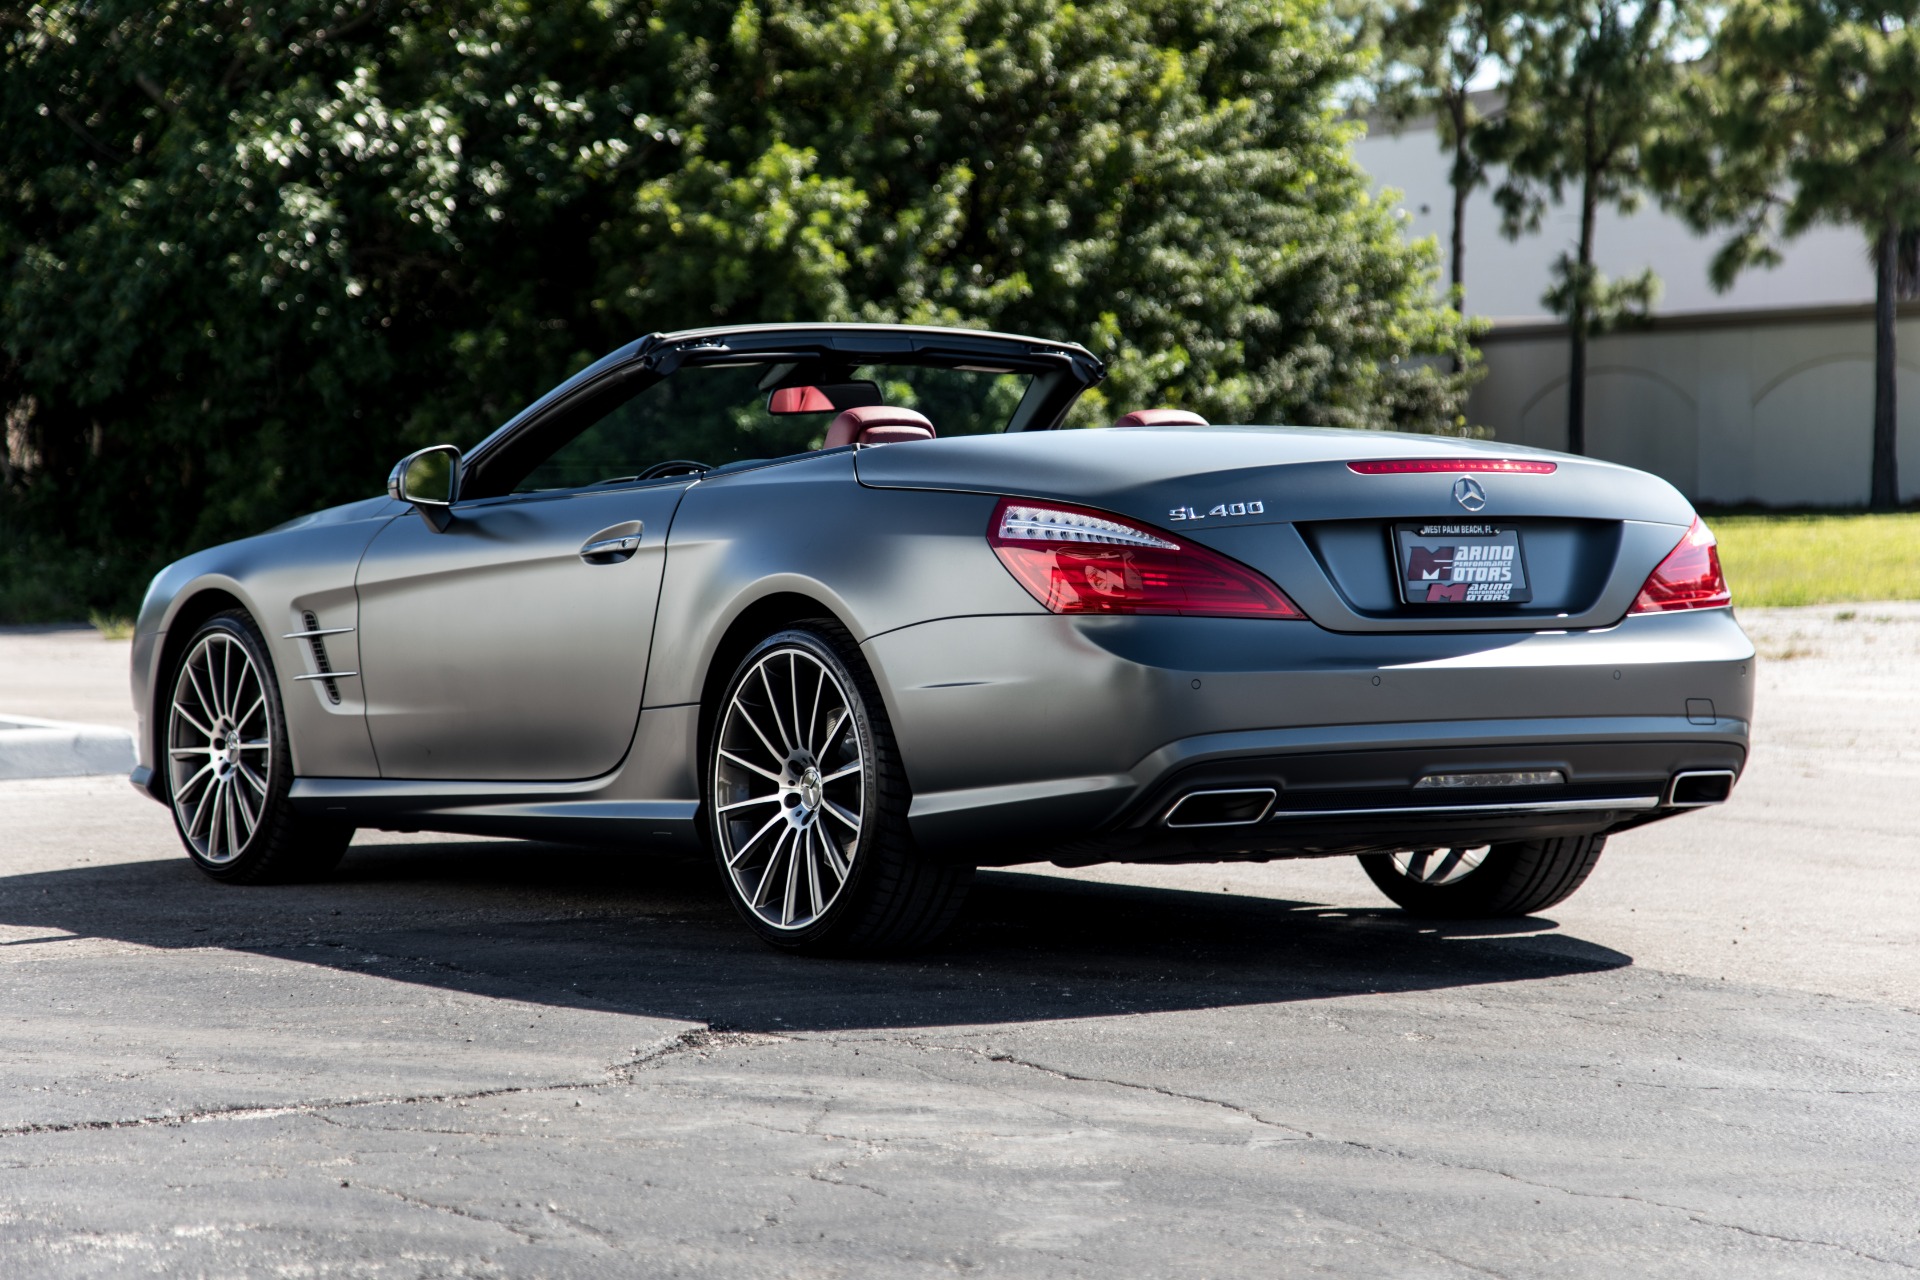 Used 2016 Mercedes Benz SL Class SL 400 For Sale 54 500 Marino 